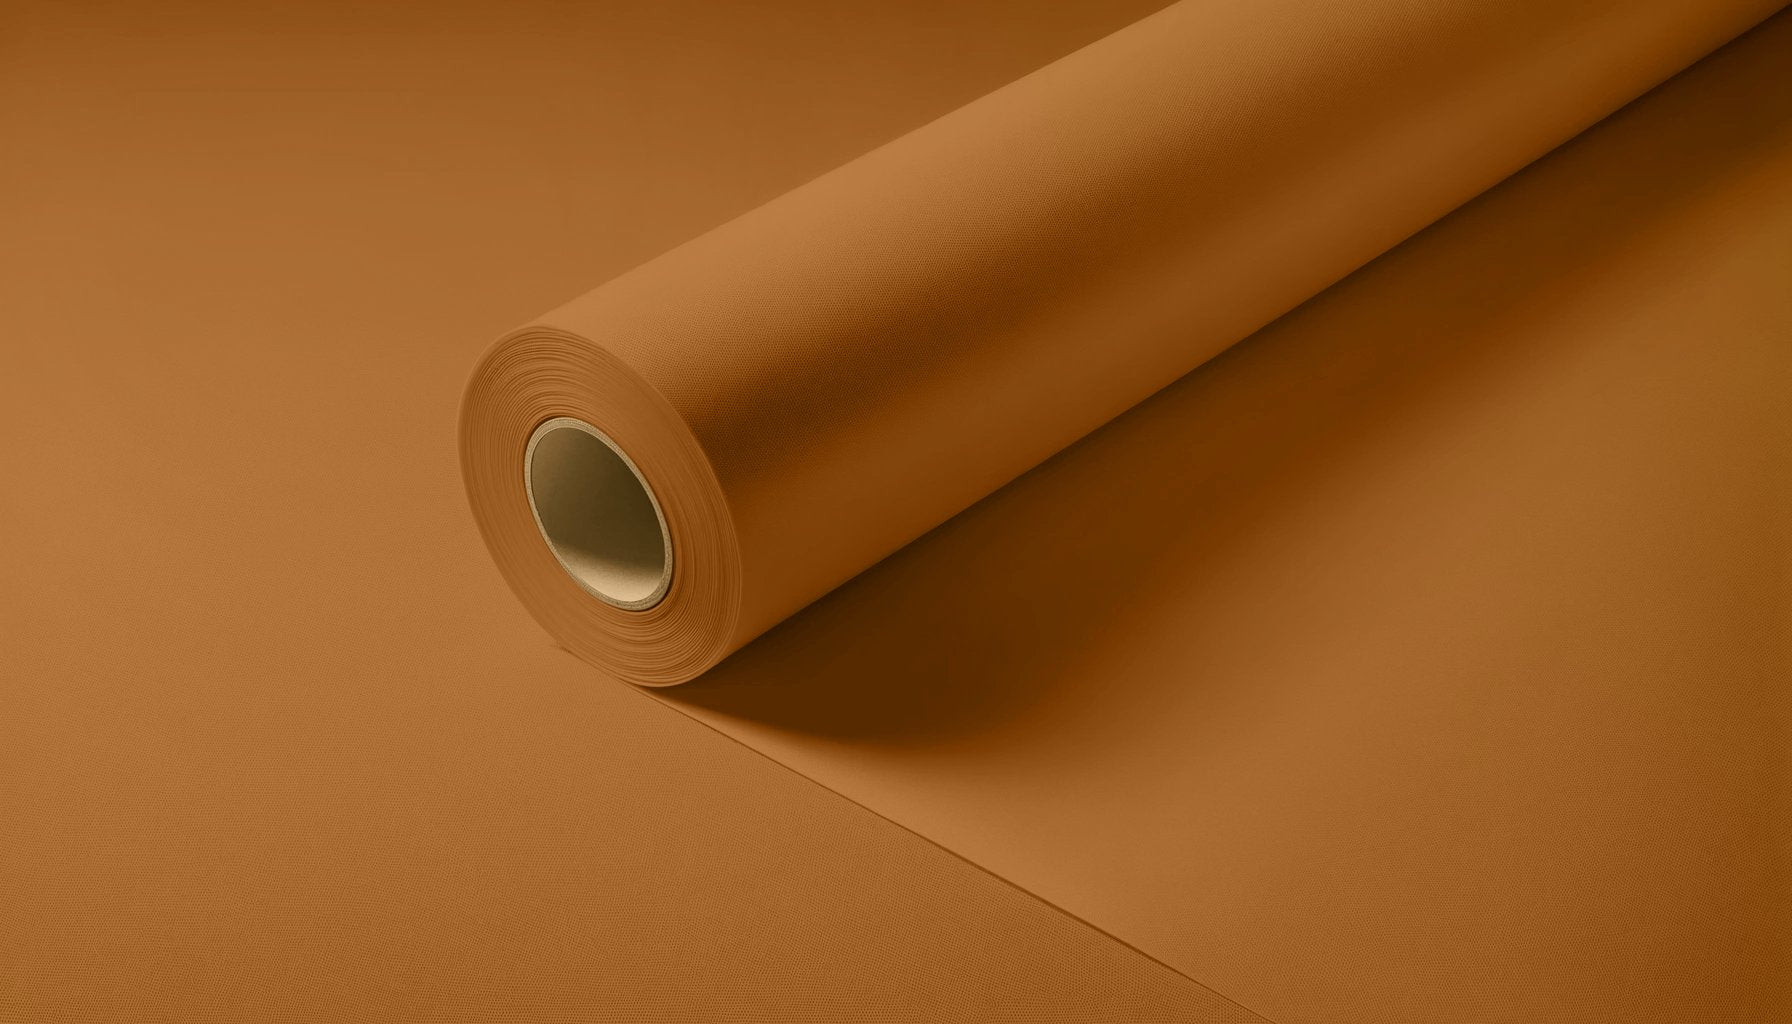 Peel & Stick Removable Re-usable Paint - Color RAL 8001 Ochre Brown - offRAL™ - RALRAW LLC, USA